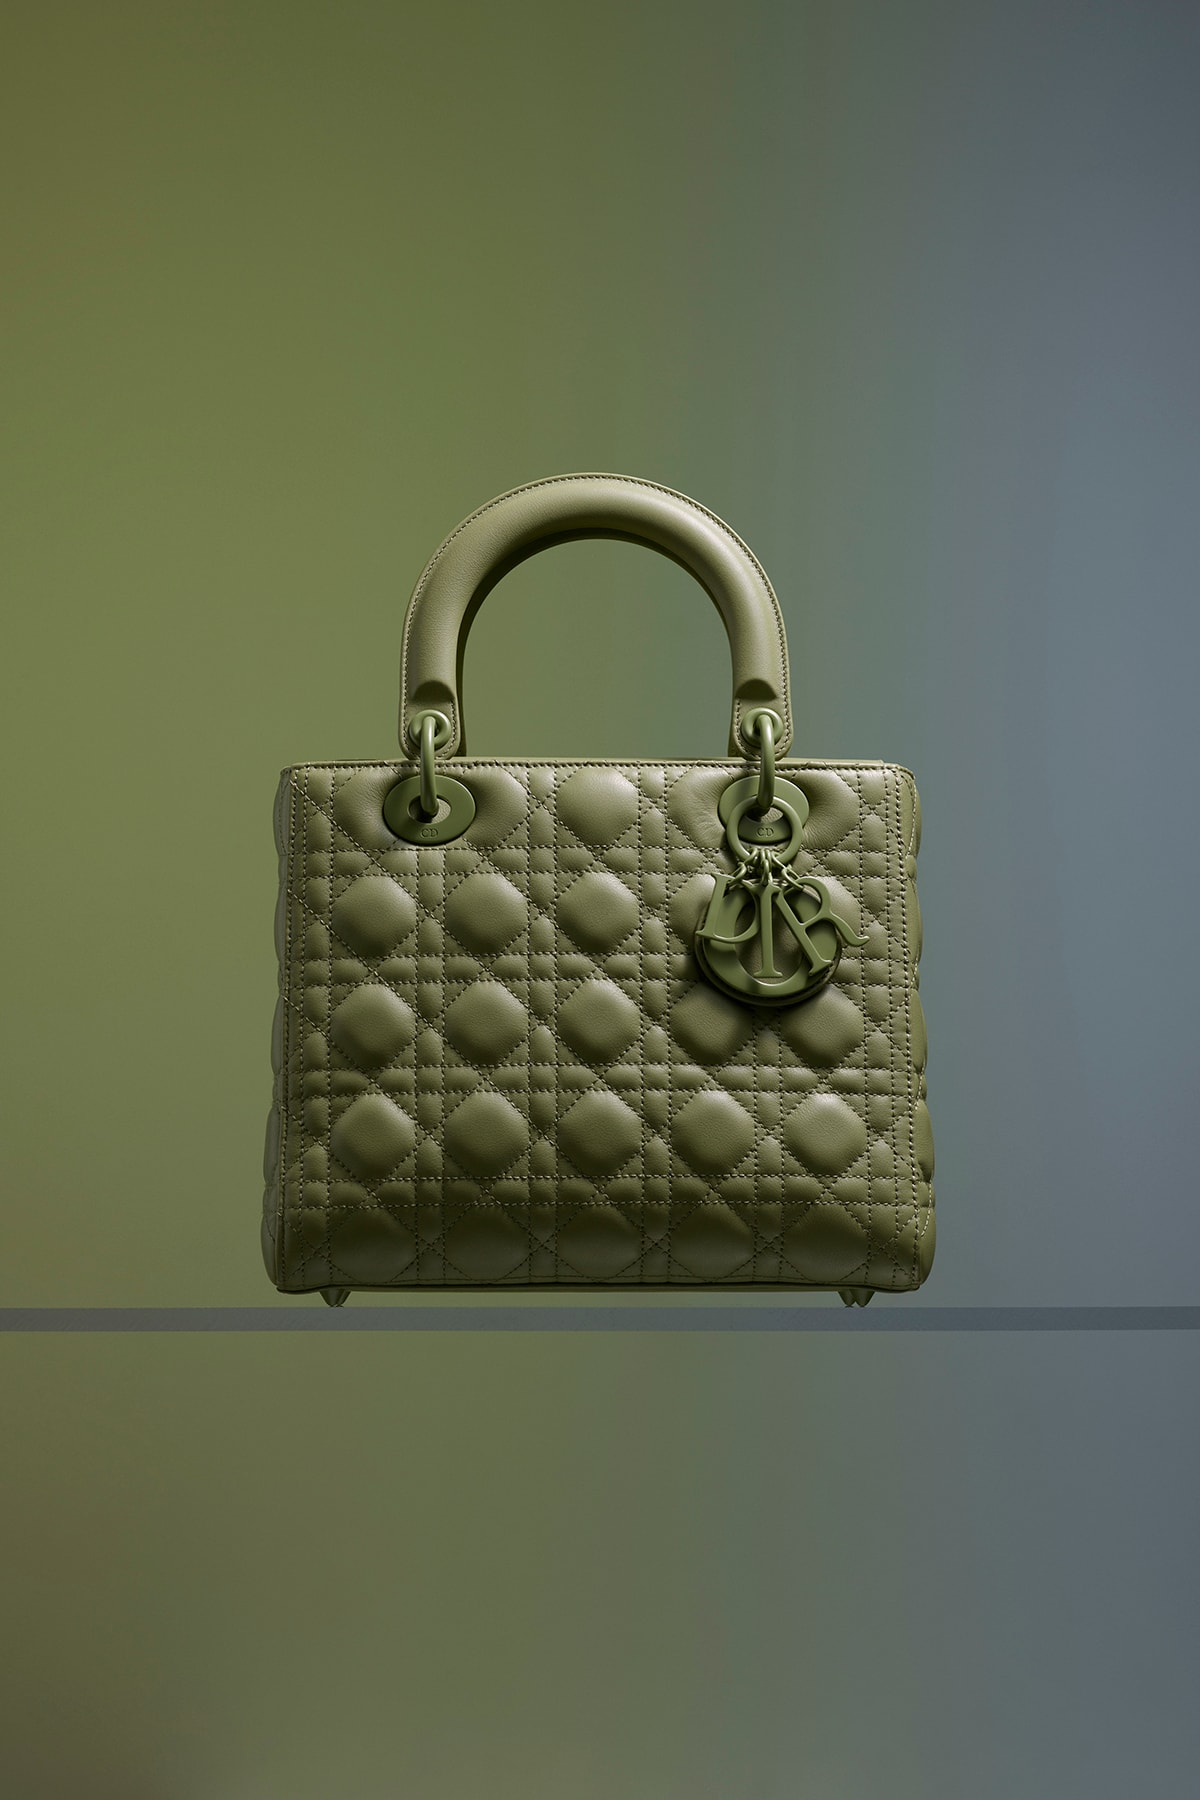 Dior Ultra-Matte Collection Bags Lady Dior Green